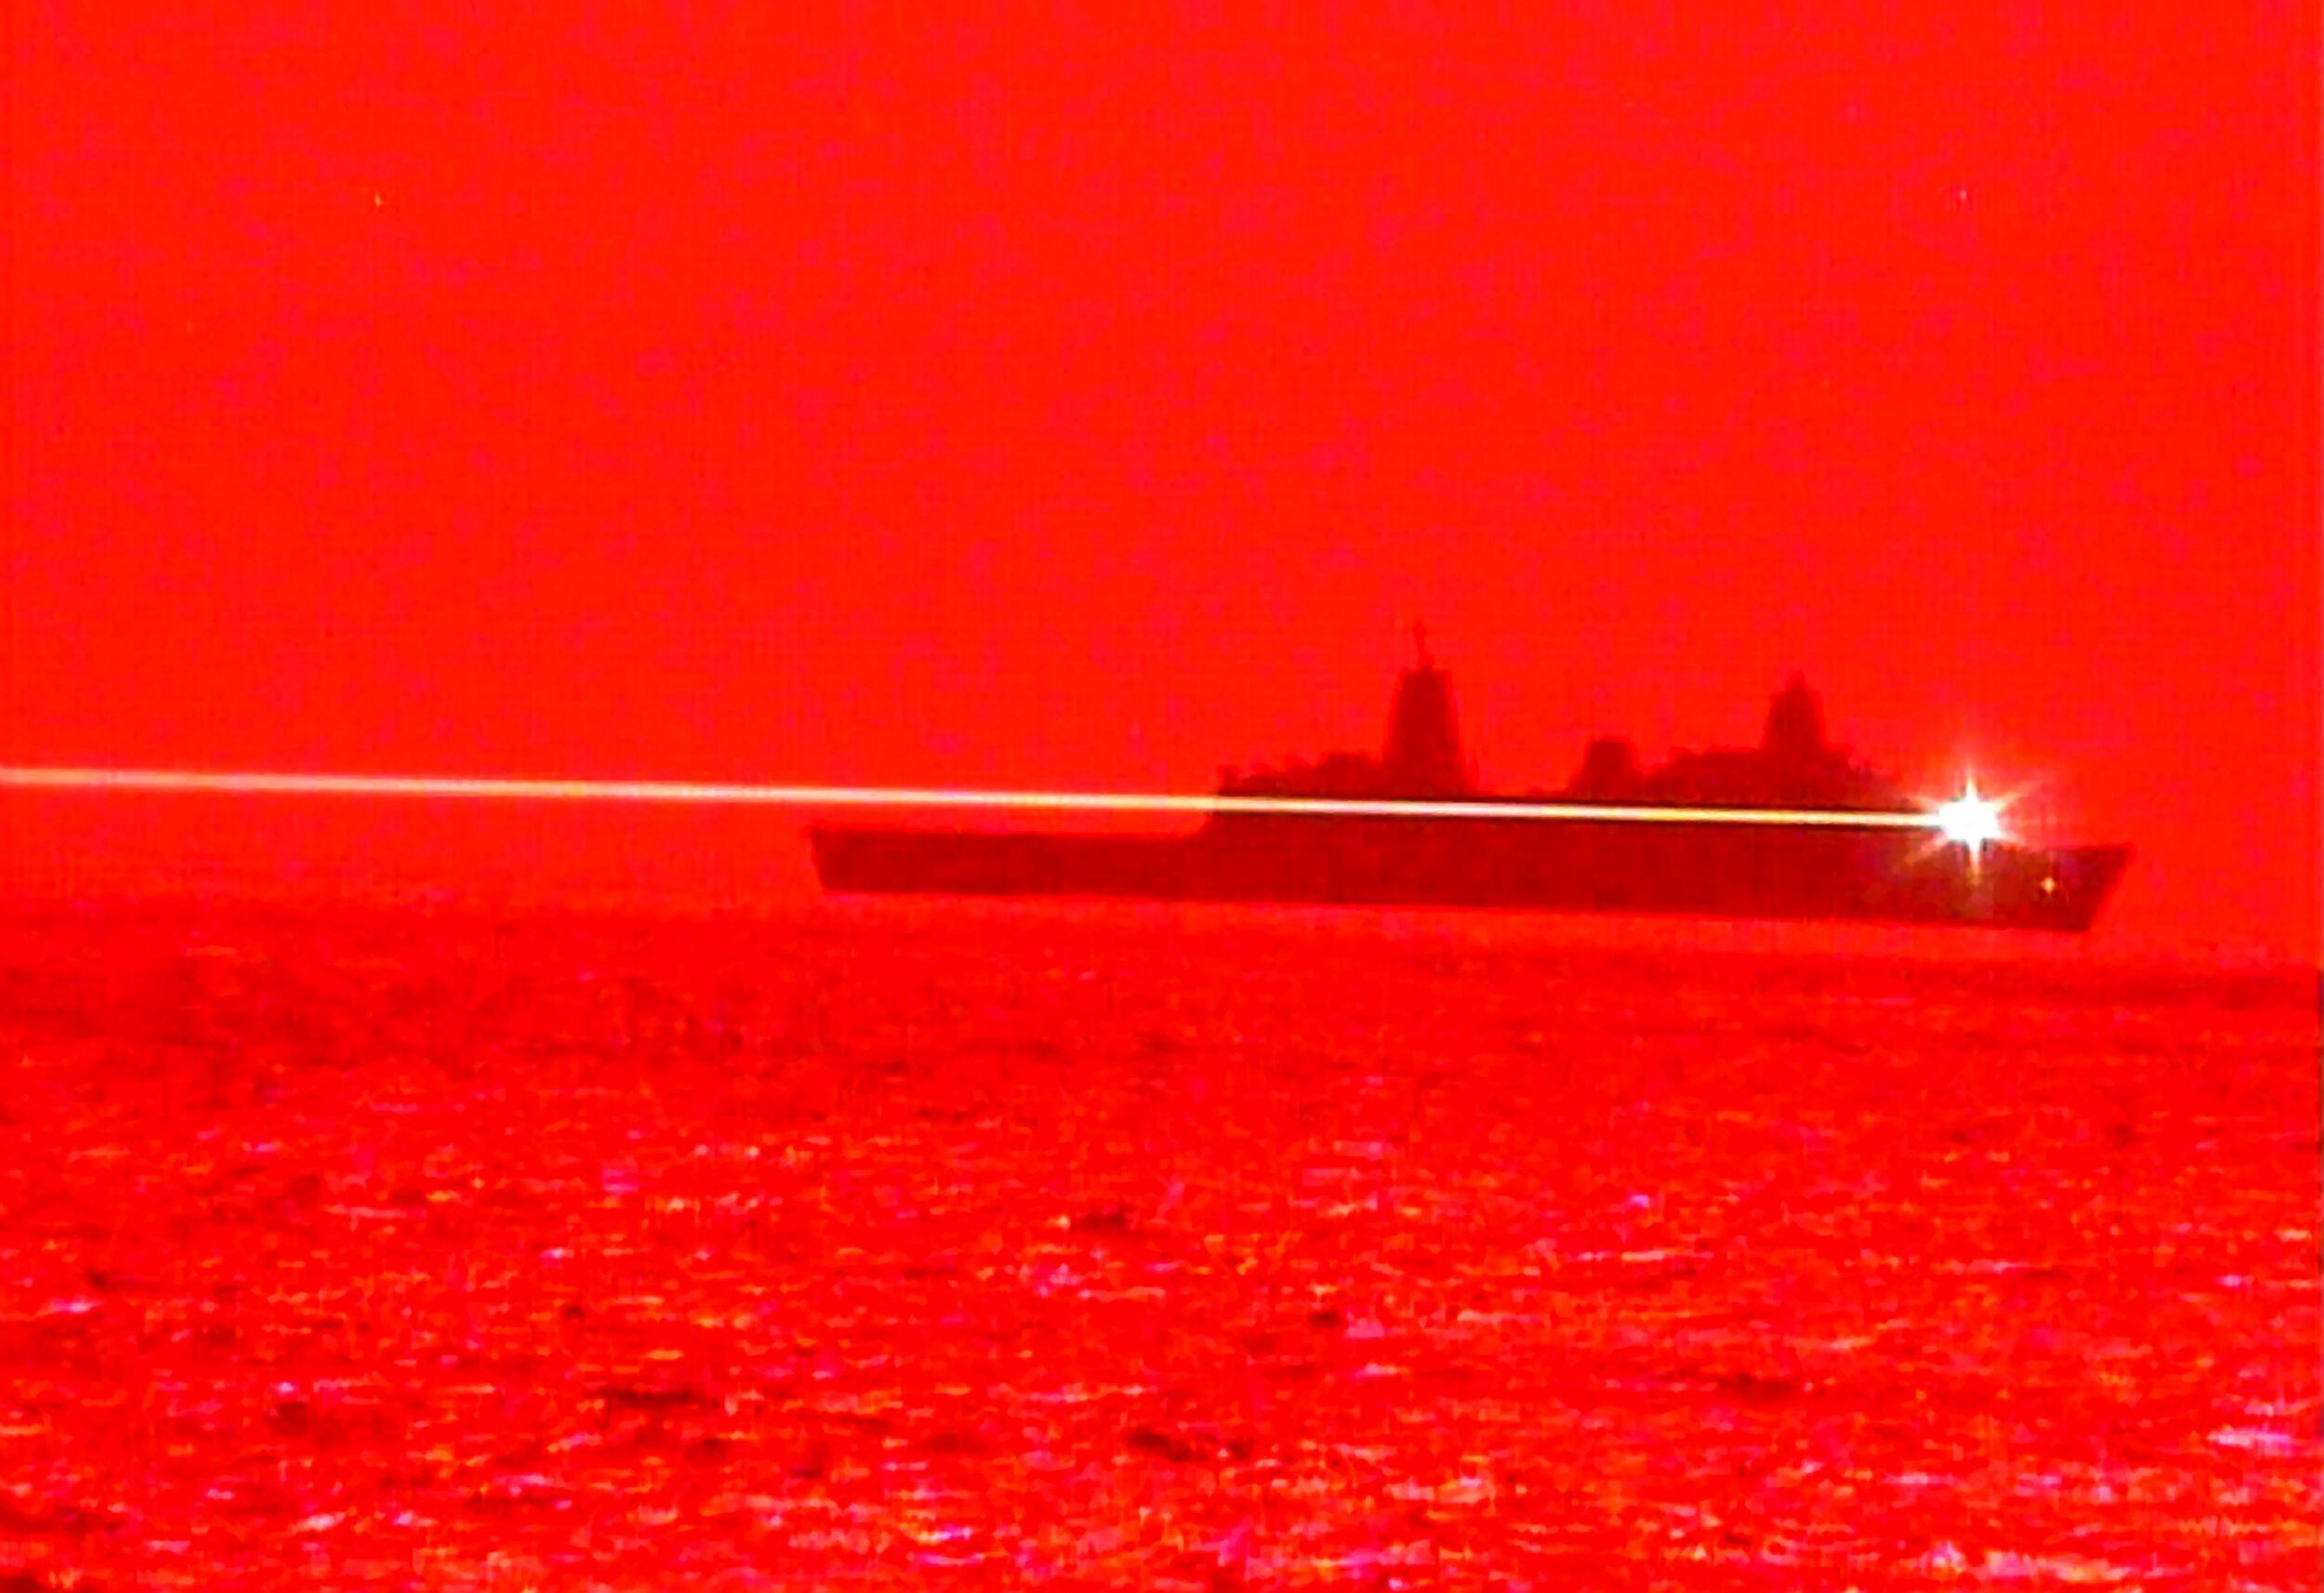 Monochromatic red image showing ship at sea with a laser shooting across frame